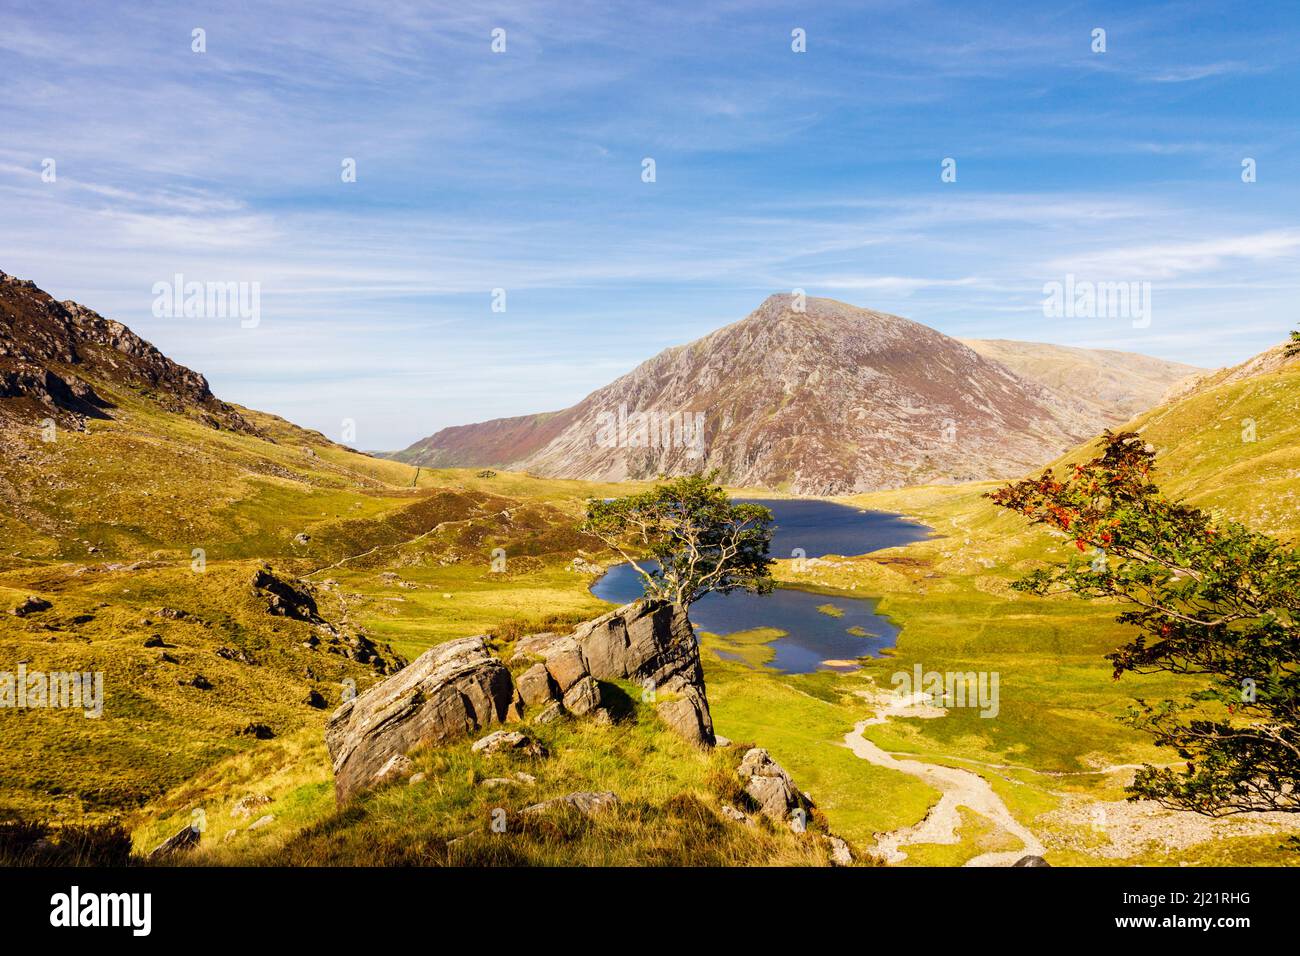 Llyn Idwal in Cwm Idwal National Nature Reserve with Pen Yr Ole Wen mountain beyond in Snowdonia National Park. Ogwen, Gwynedd, North Wales, UK Stock Photo